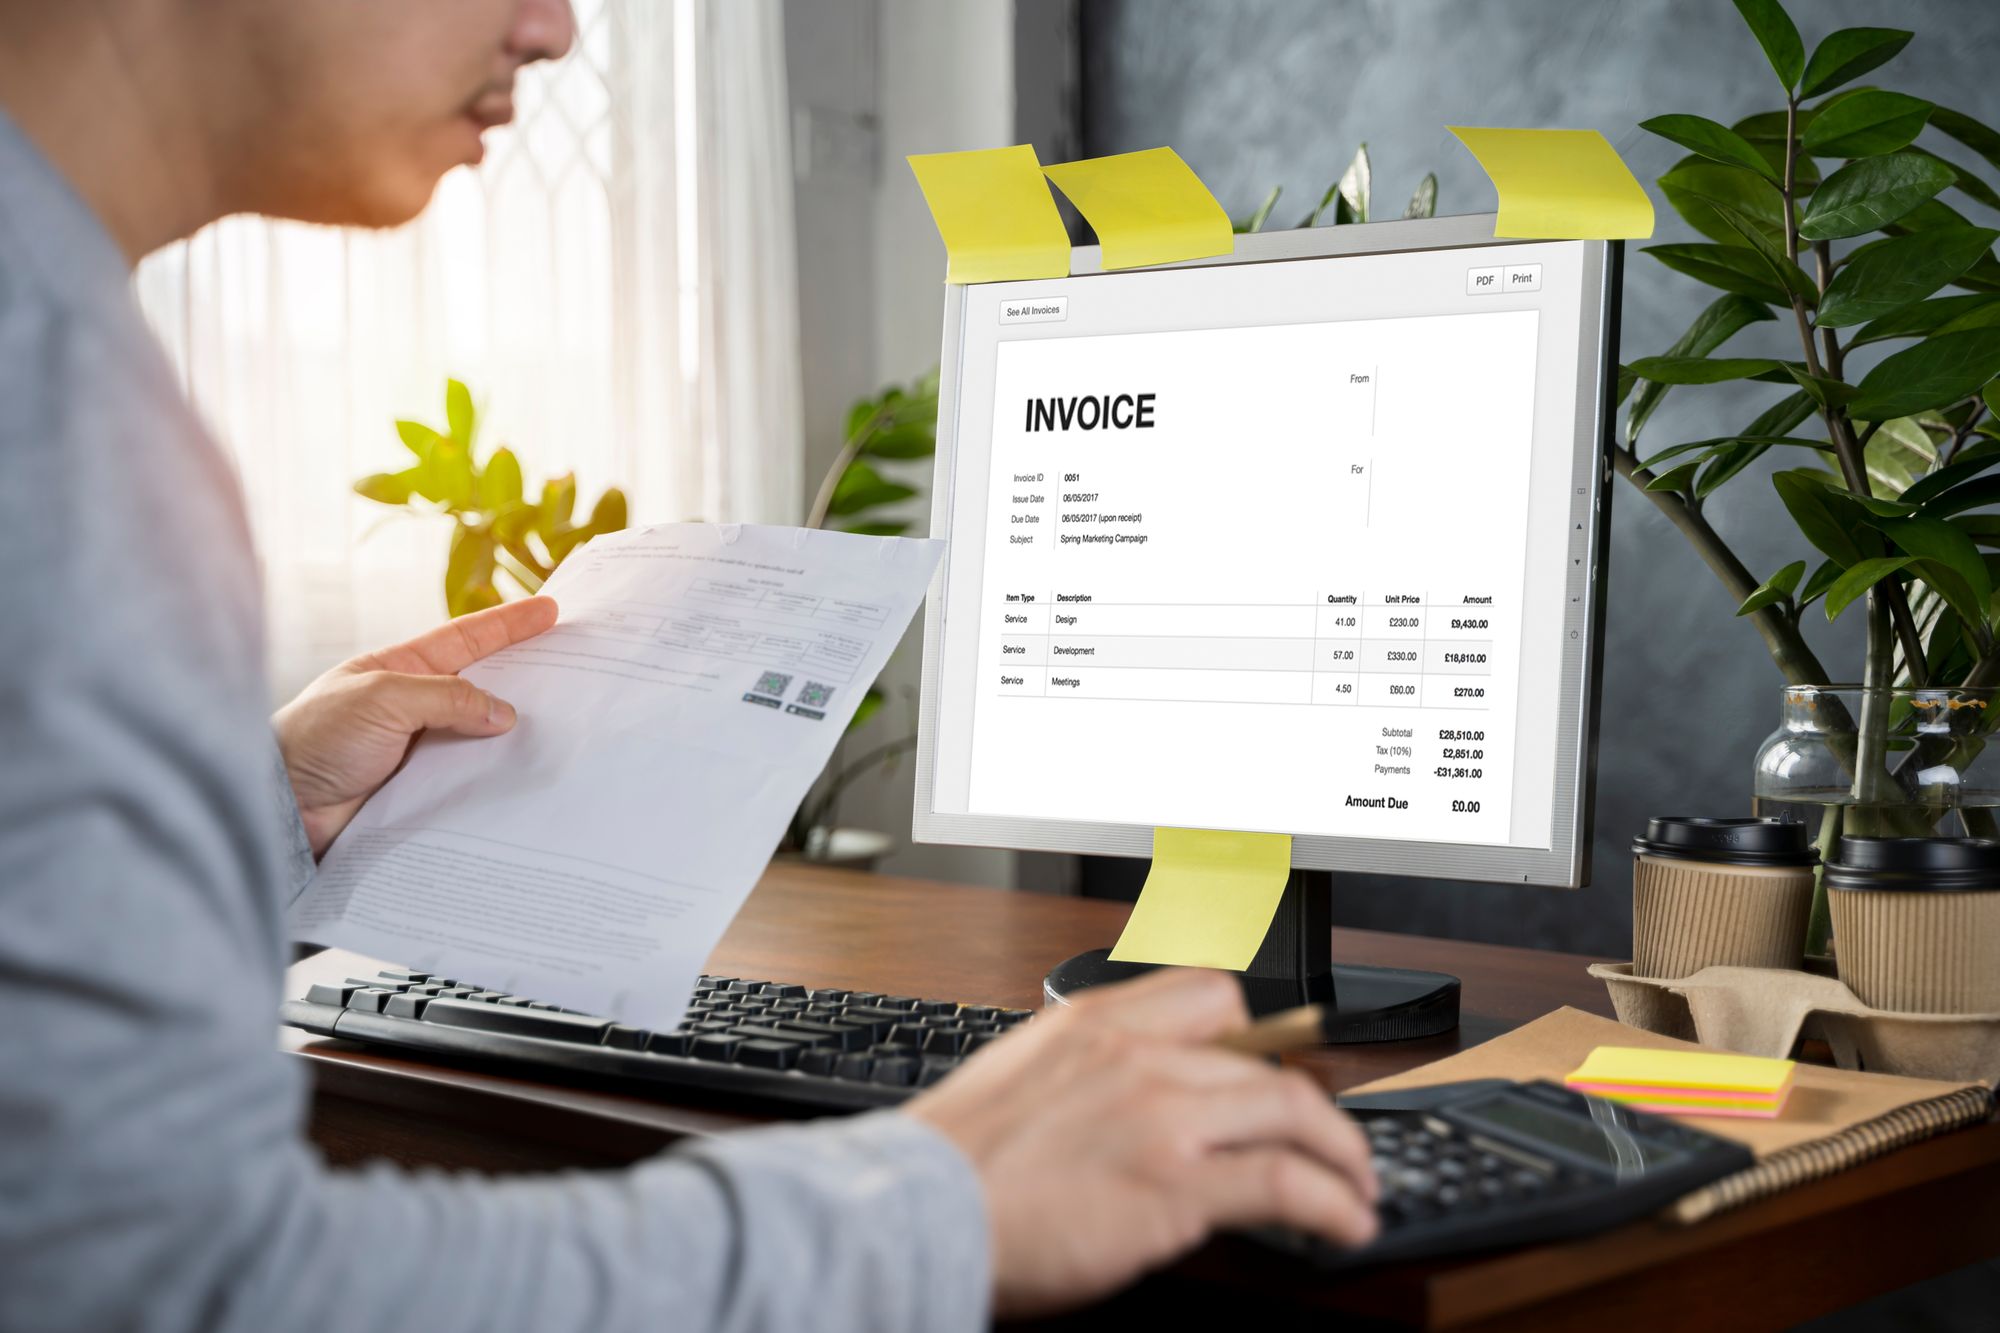 How To Send Branded Invoice: The Quick And Easy Guide To Getting Paid